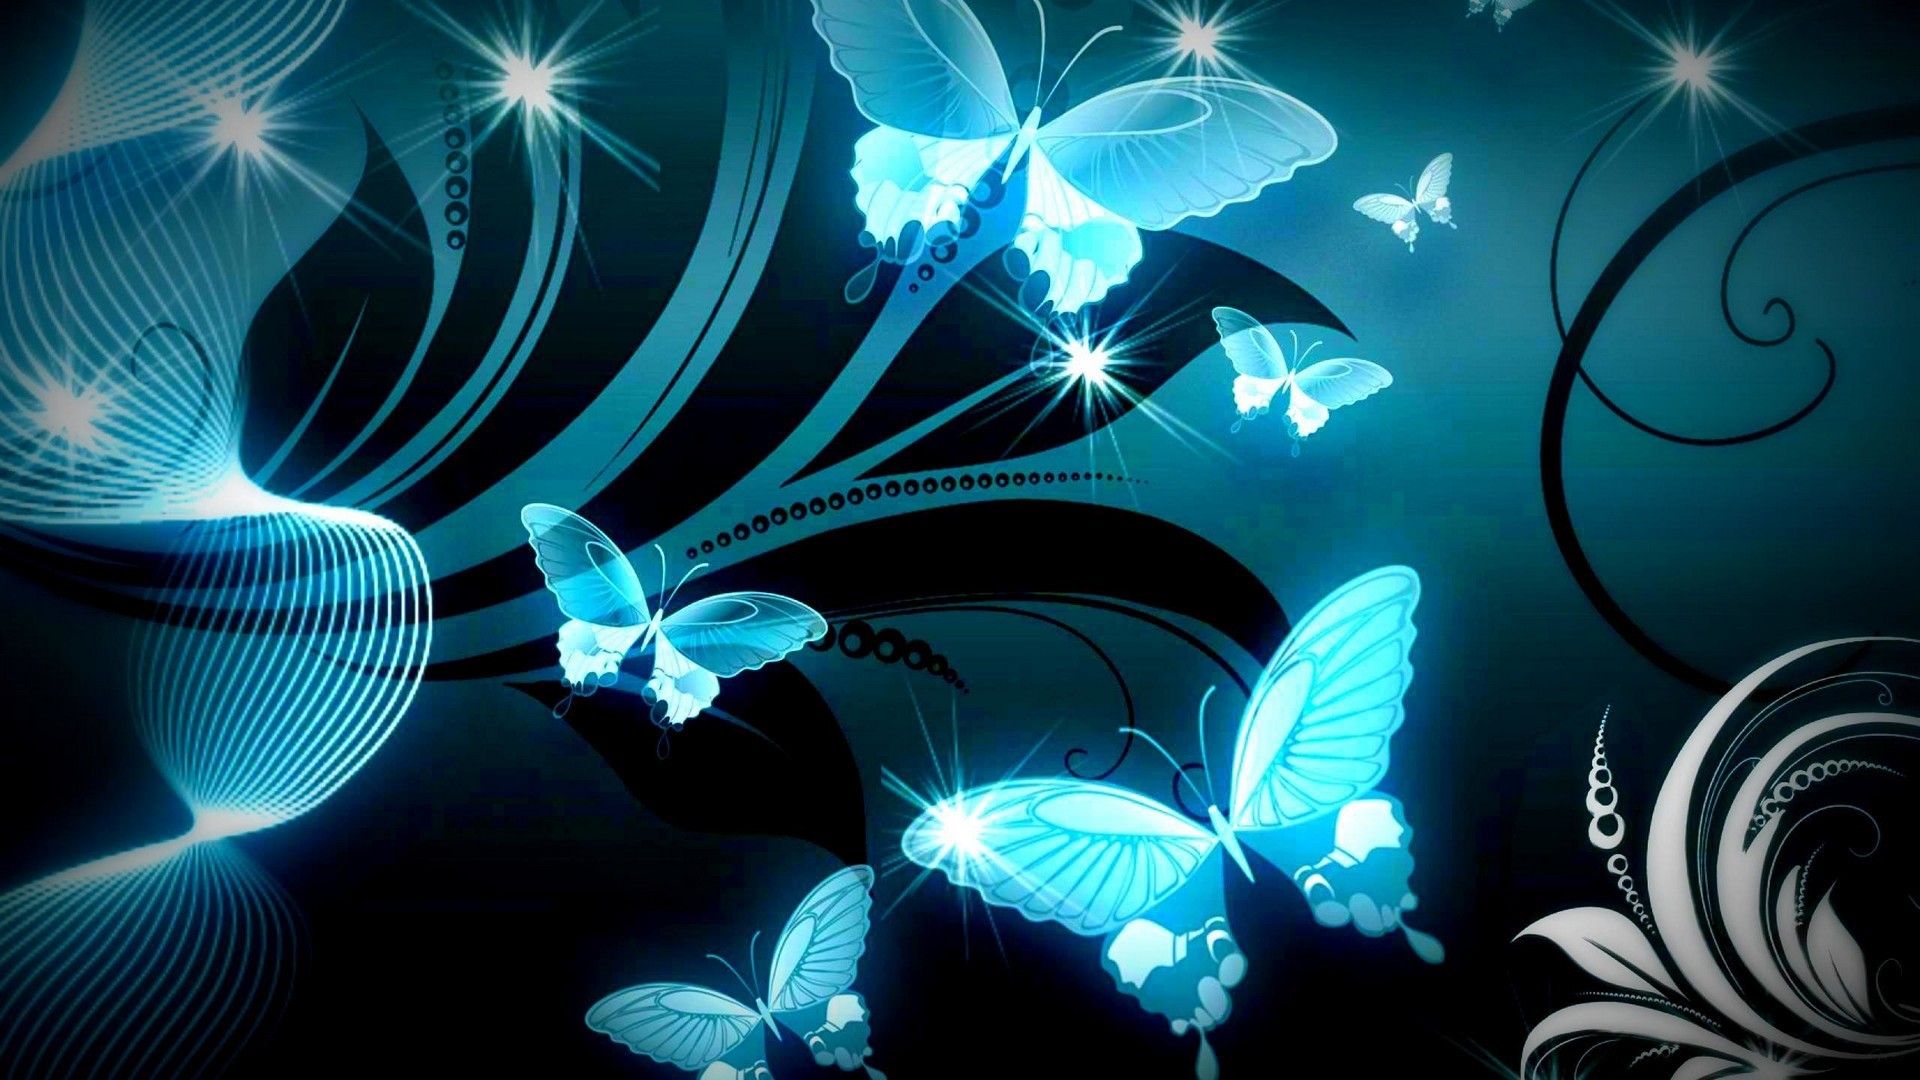 HD Butterfly Design Backgrounds Resolution 1920x1080